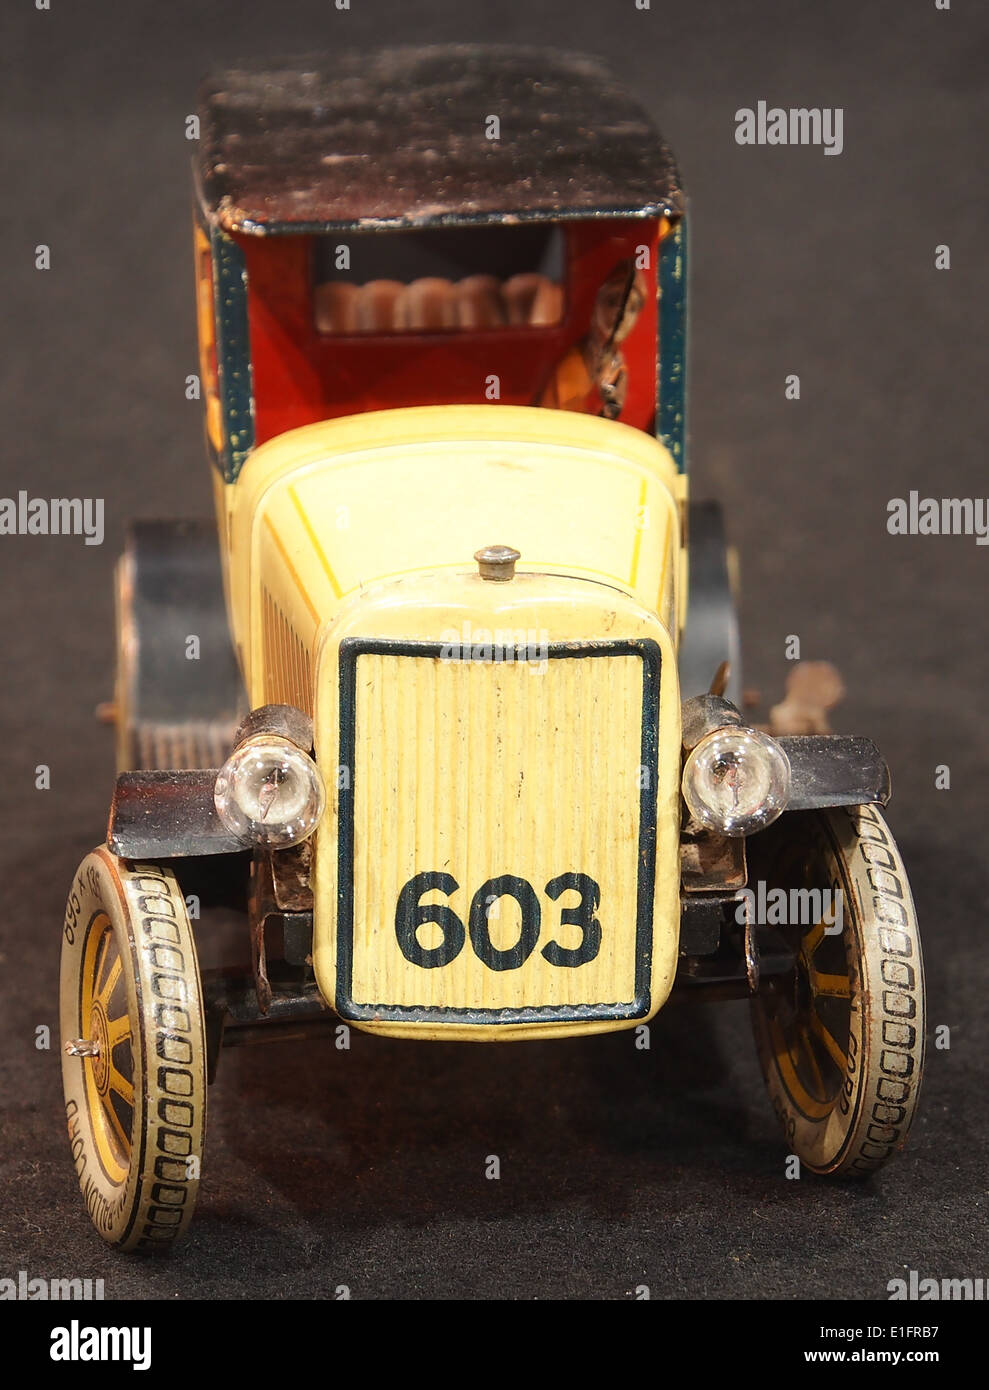 Photo of a JDN tin car 603 made in Germany, Stock Photo